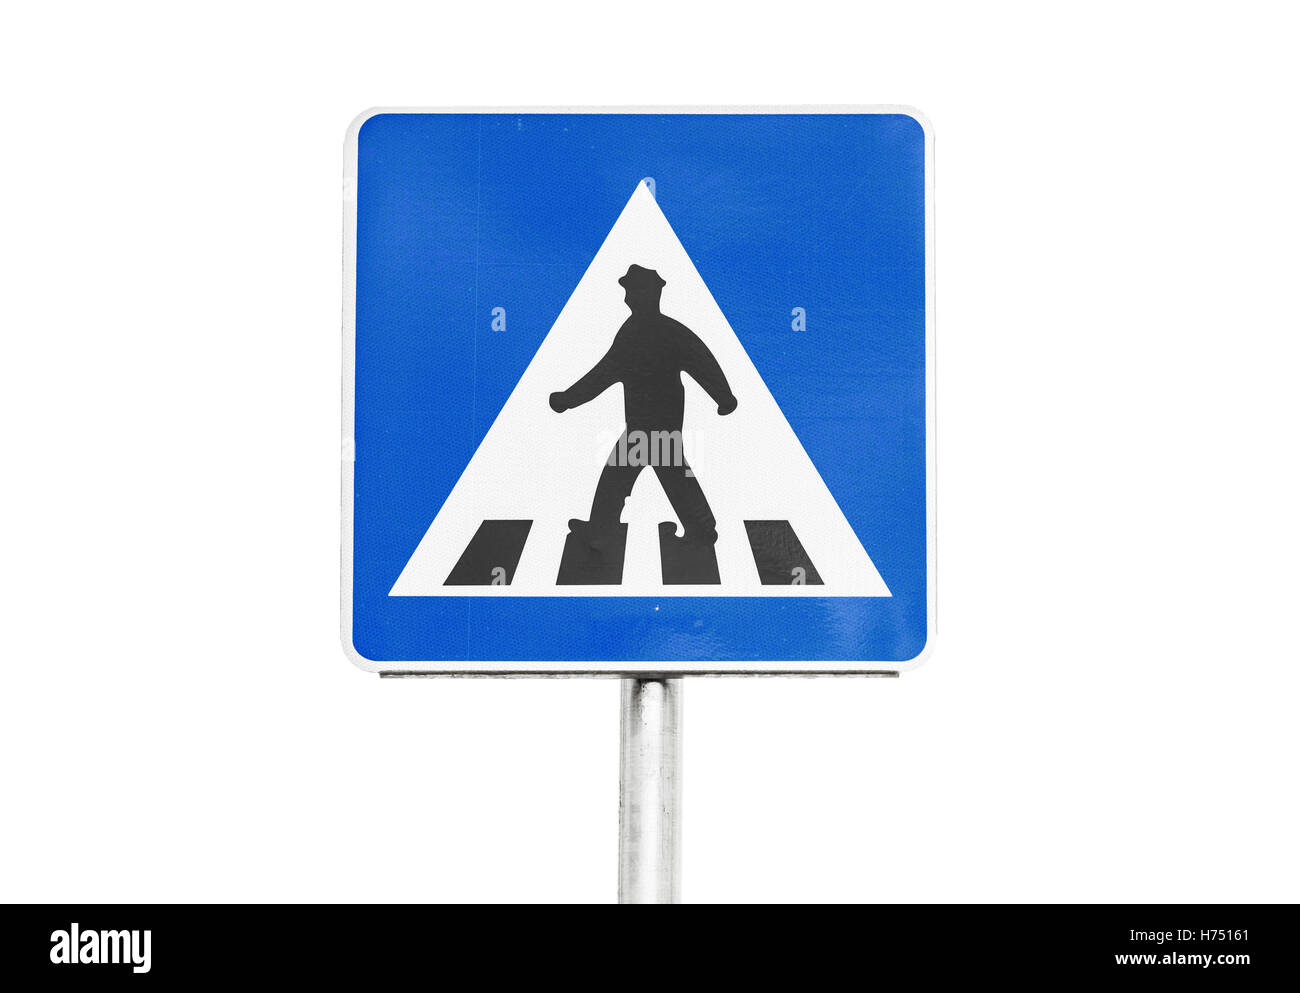 Pedestrian crossing. Square blue and white road sign with walking ...